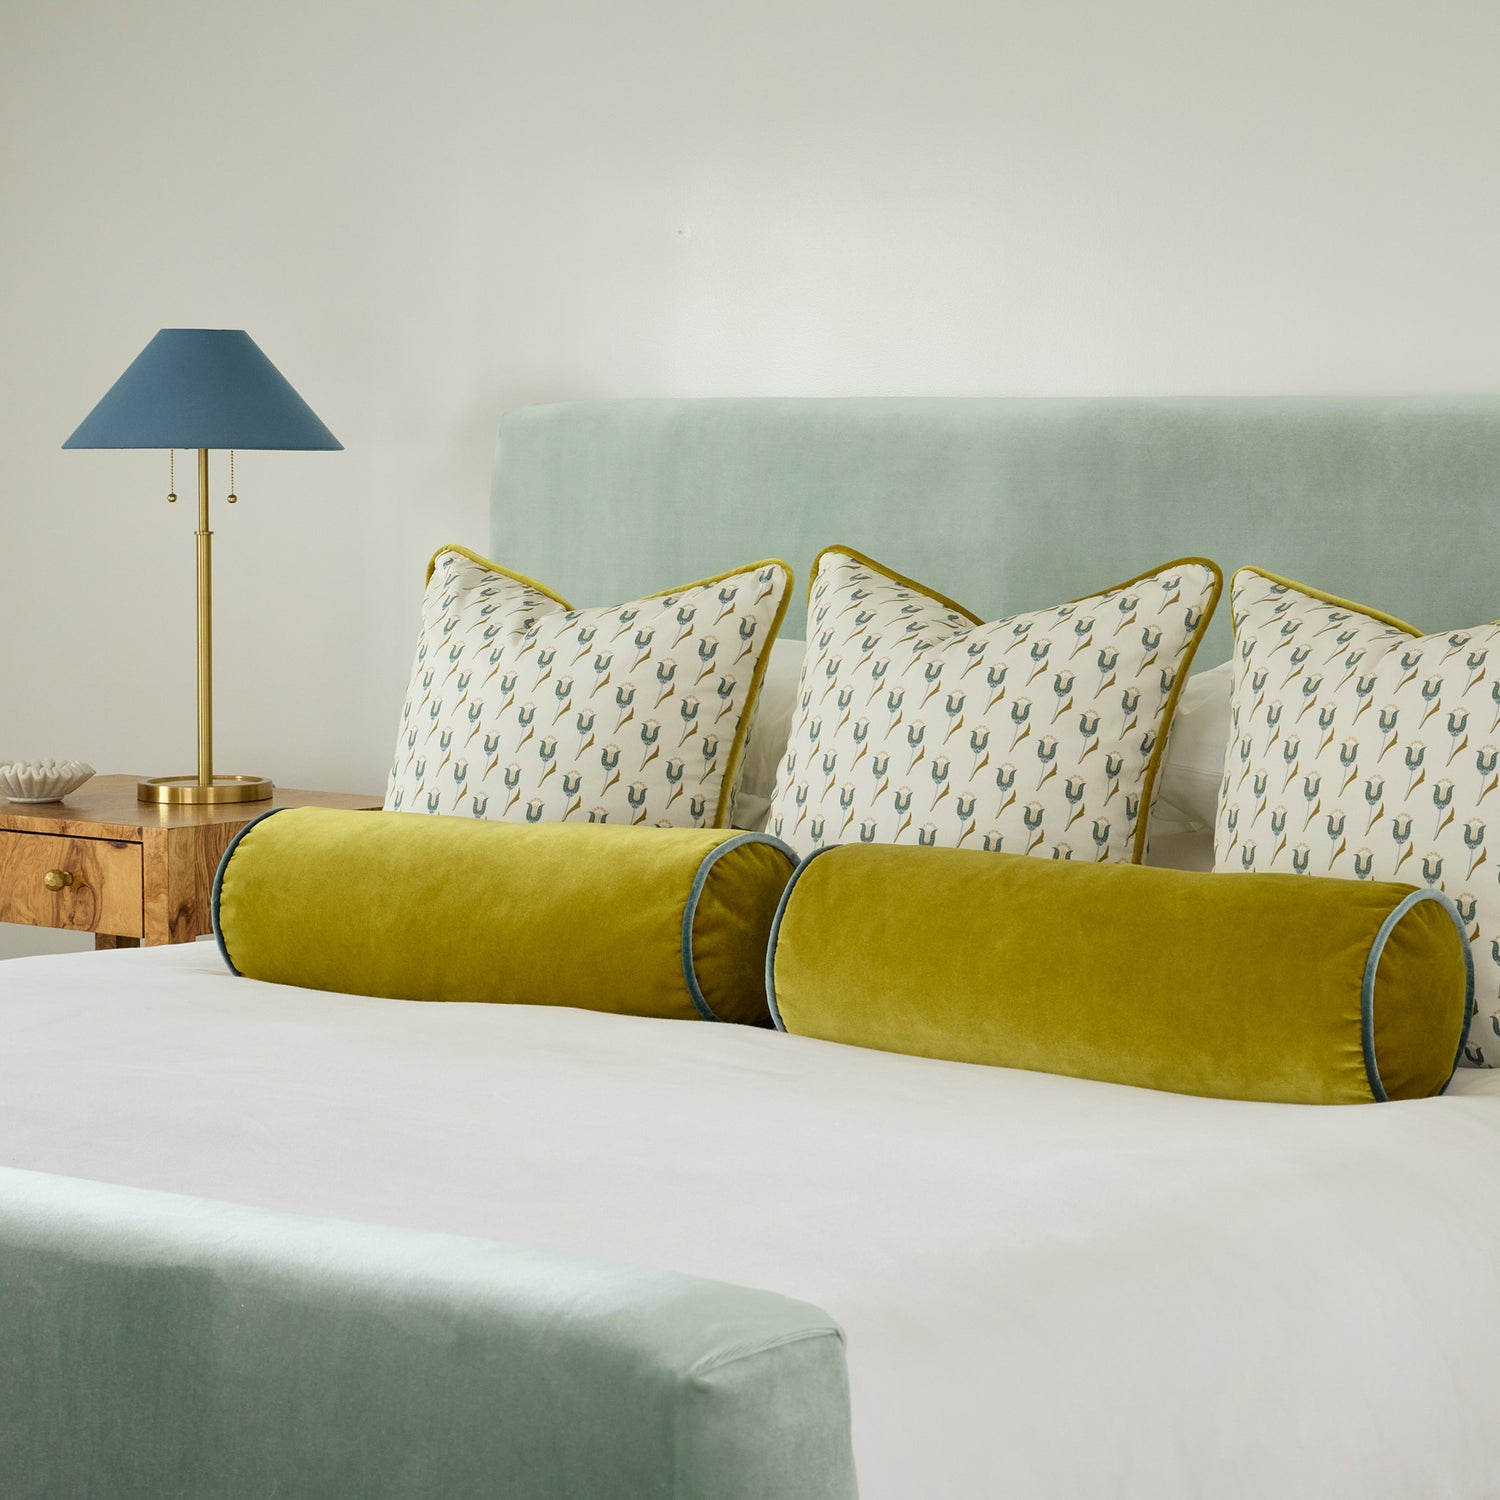 Abstract floral blue and green pillows and golden chartreuse pillows on a bed with white bedding and a brown wooden night table with a gold and blue lamp